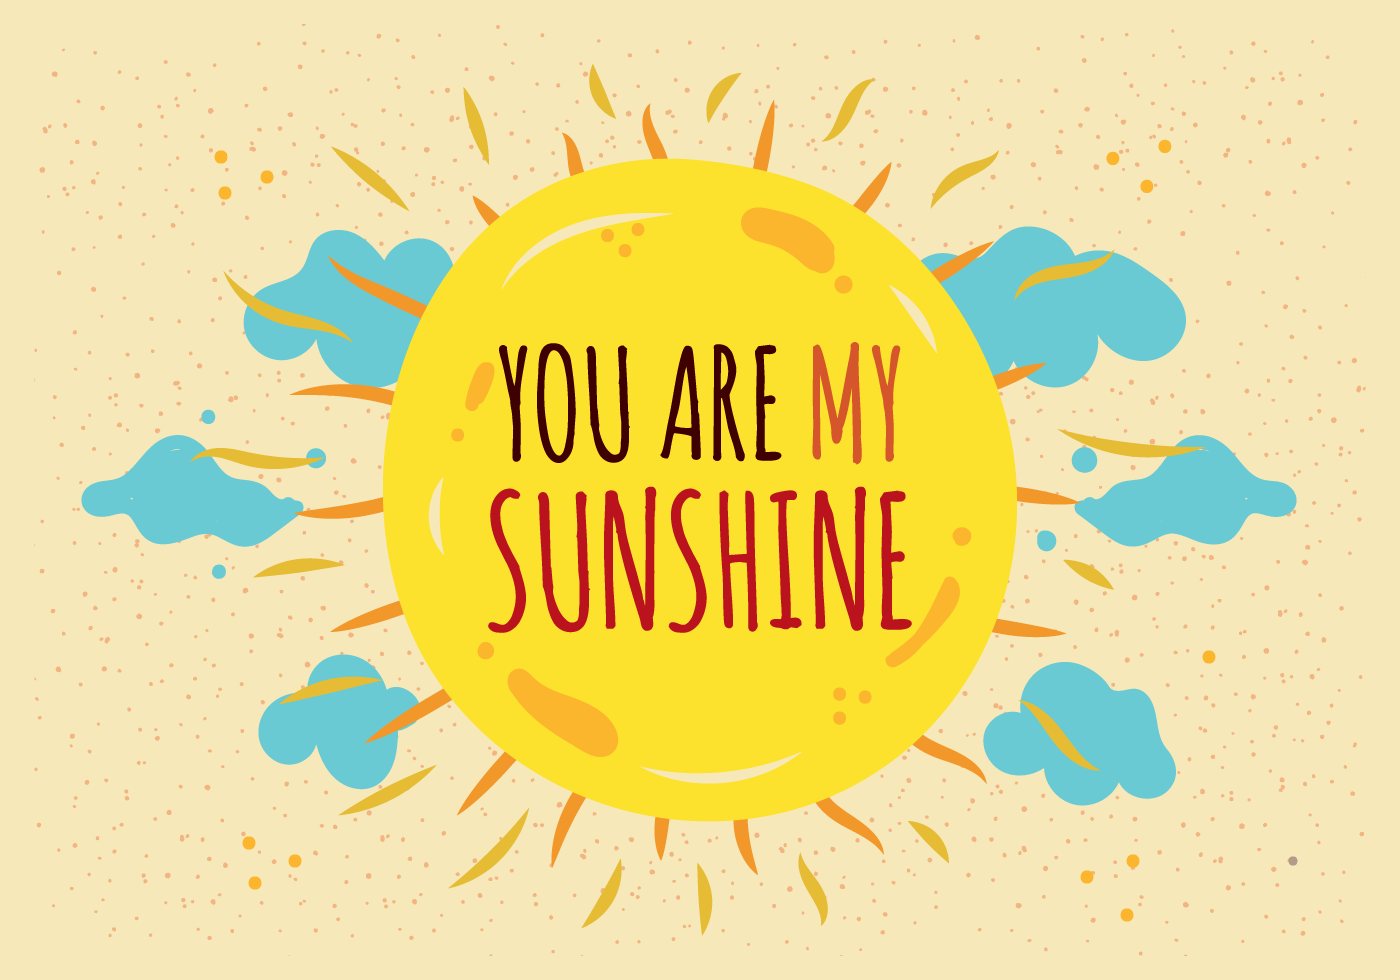 Download the You are my sunshine vector 181811 royalty-free Vector fr...